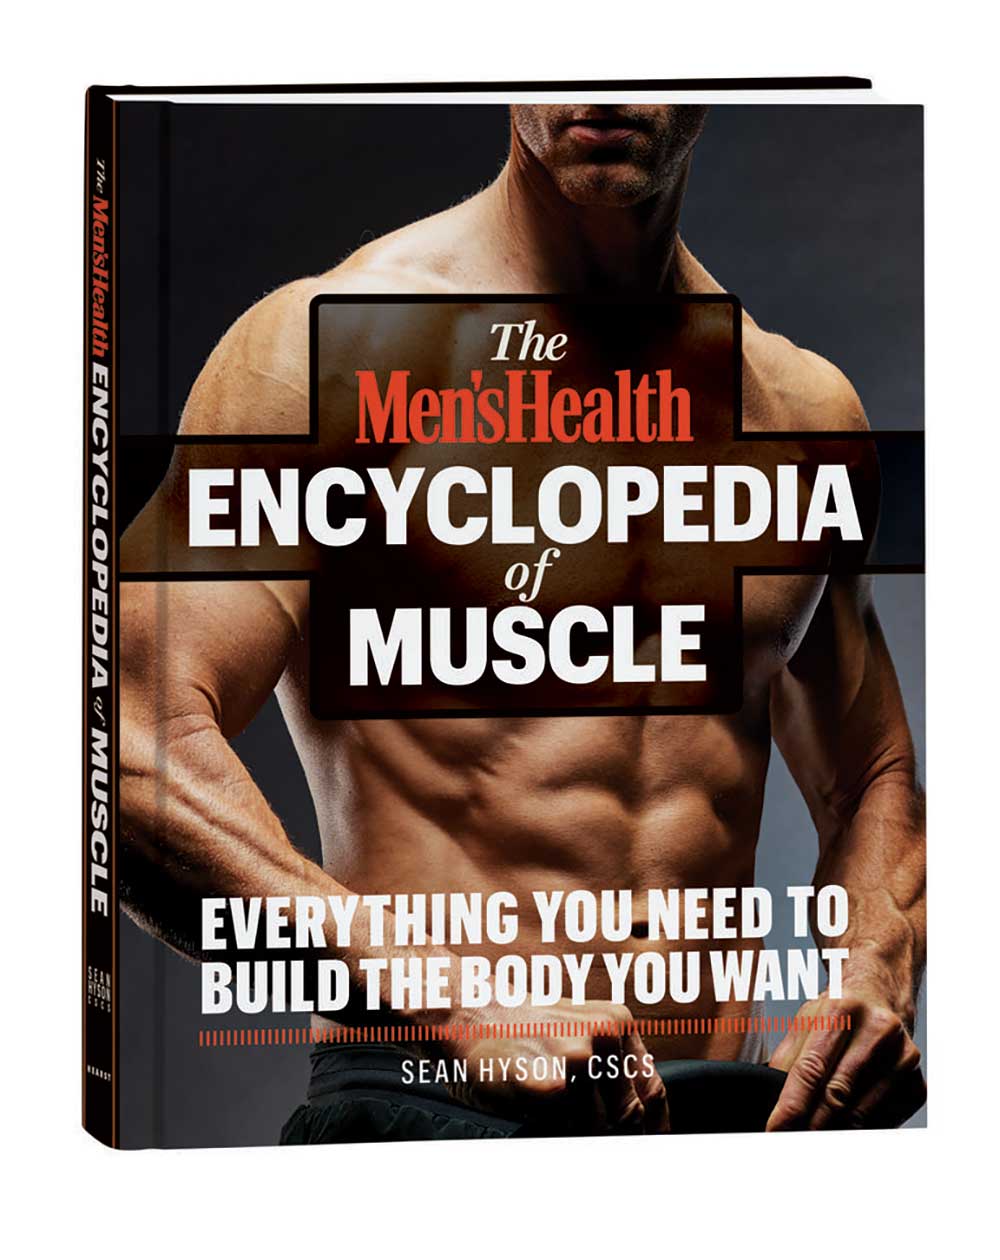 My Top 3 Muscle-Building Techniques